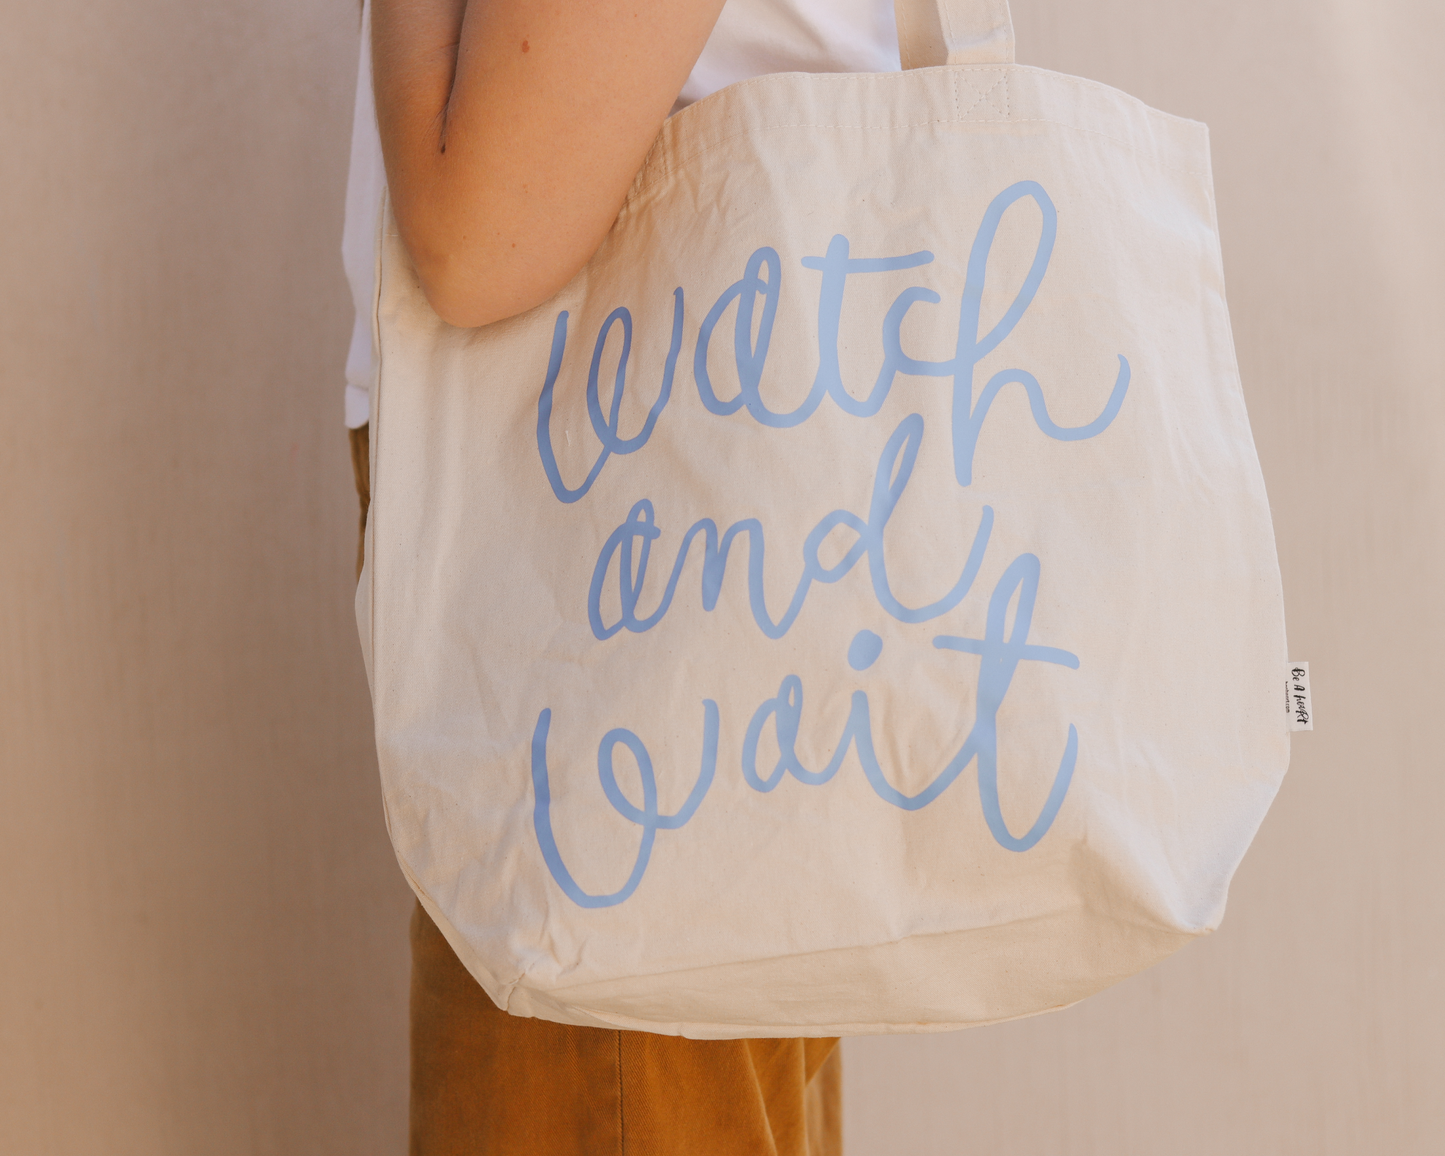 Watch and Wait Tote Bag